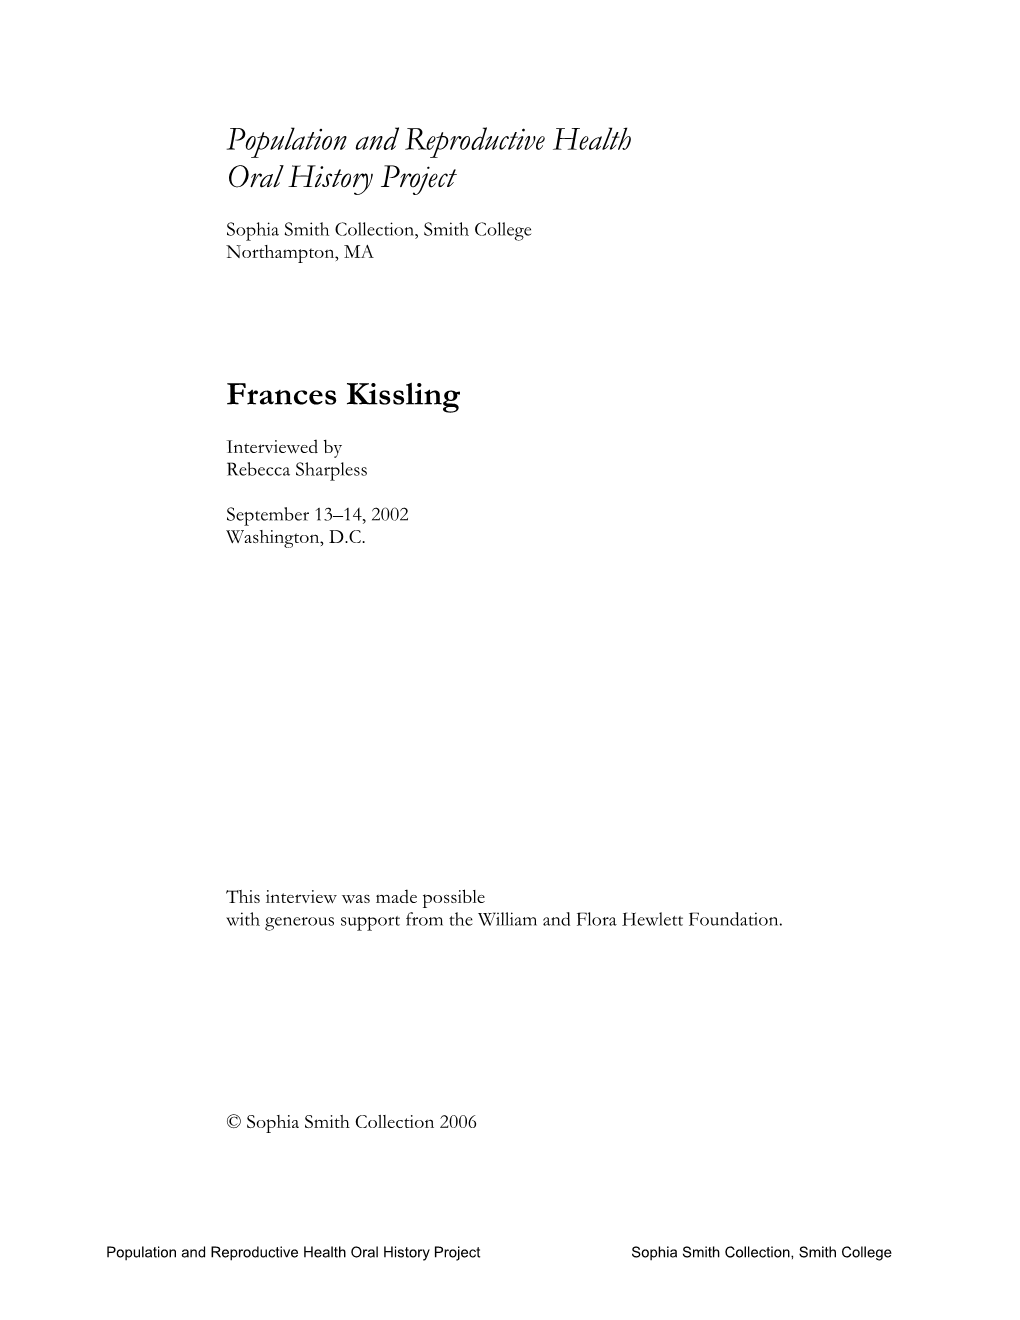 Population and Reproductive Health Oral History Project: Frances Kissling